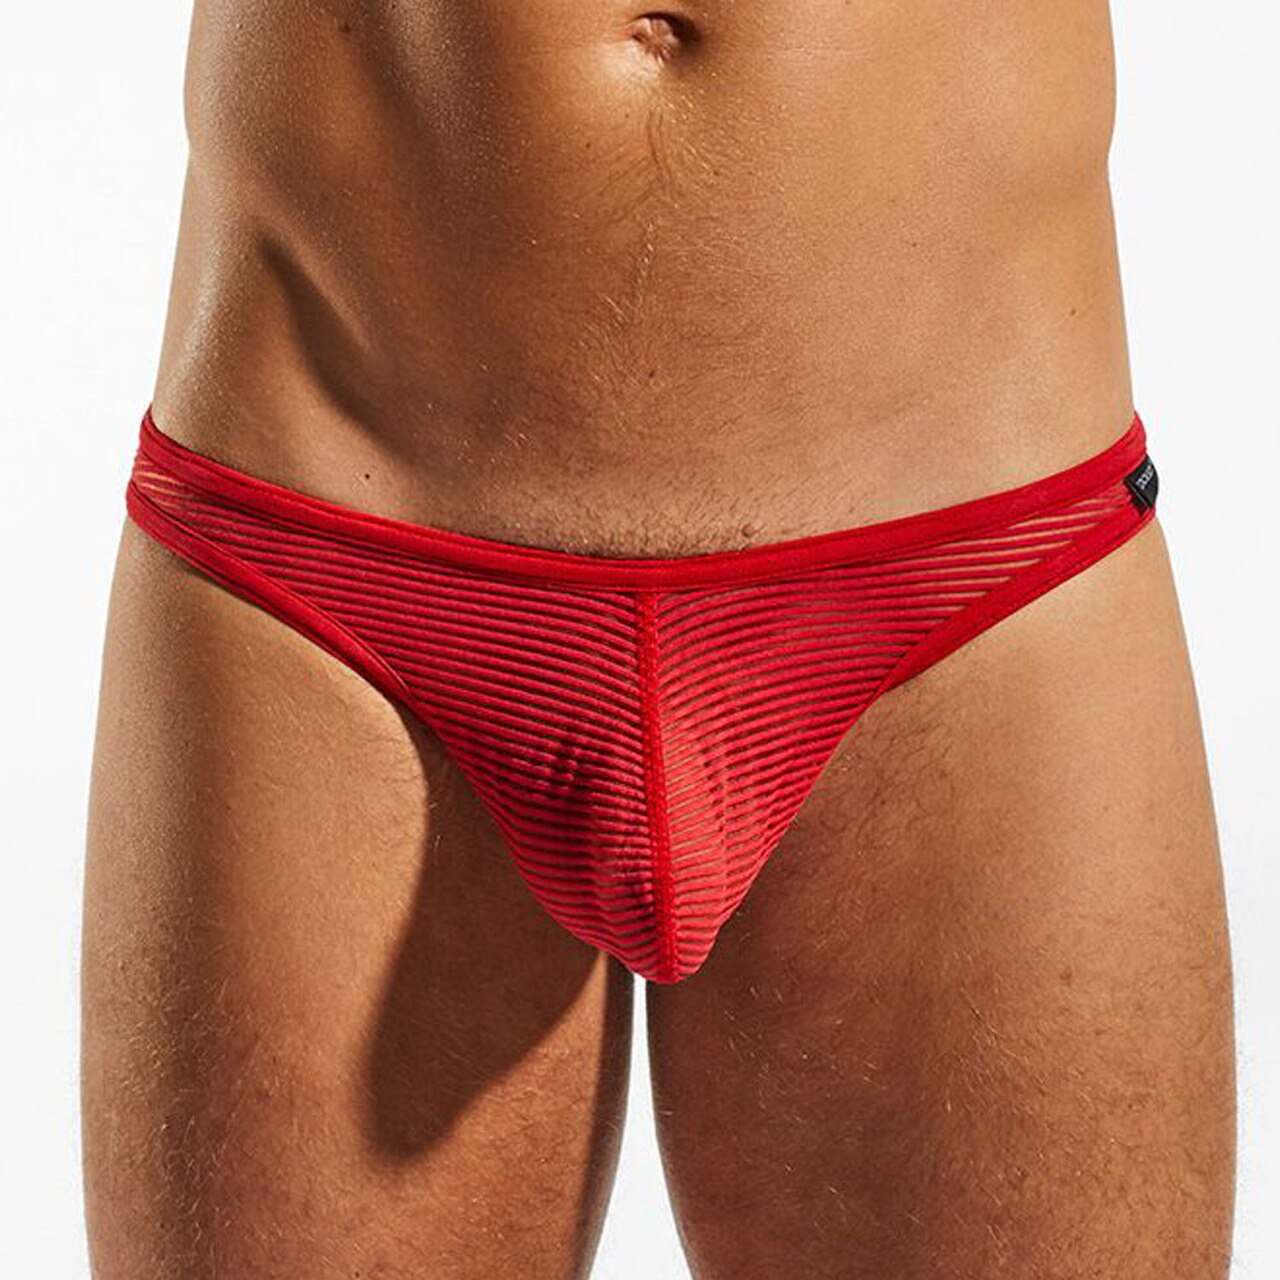 SALE - Mens Cocksox Sheer Multi Striped Brief Cupid Red